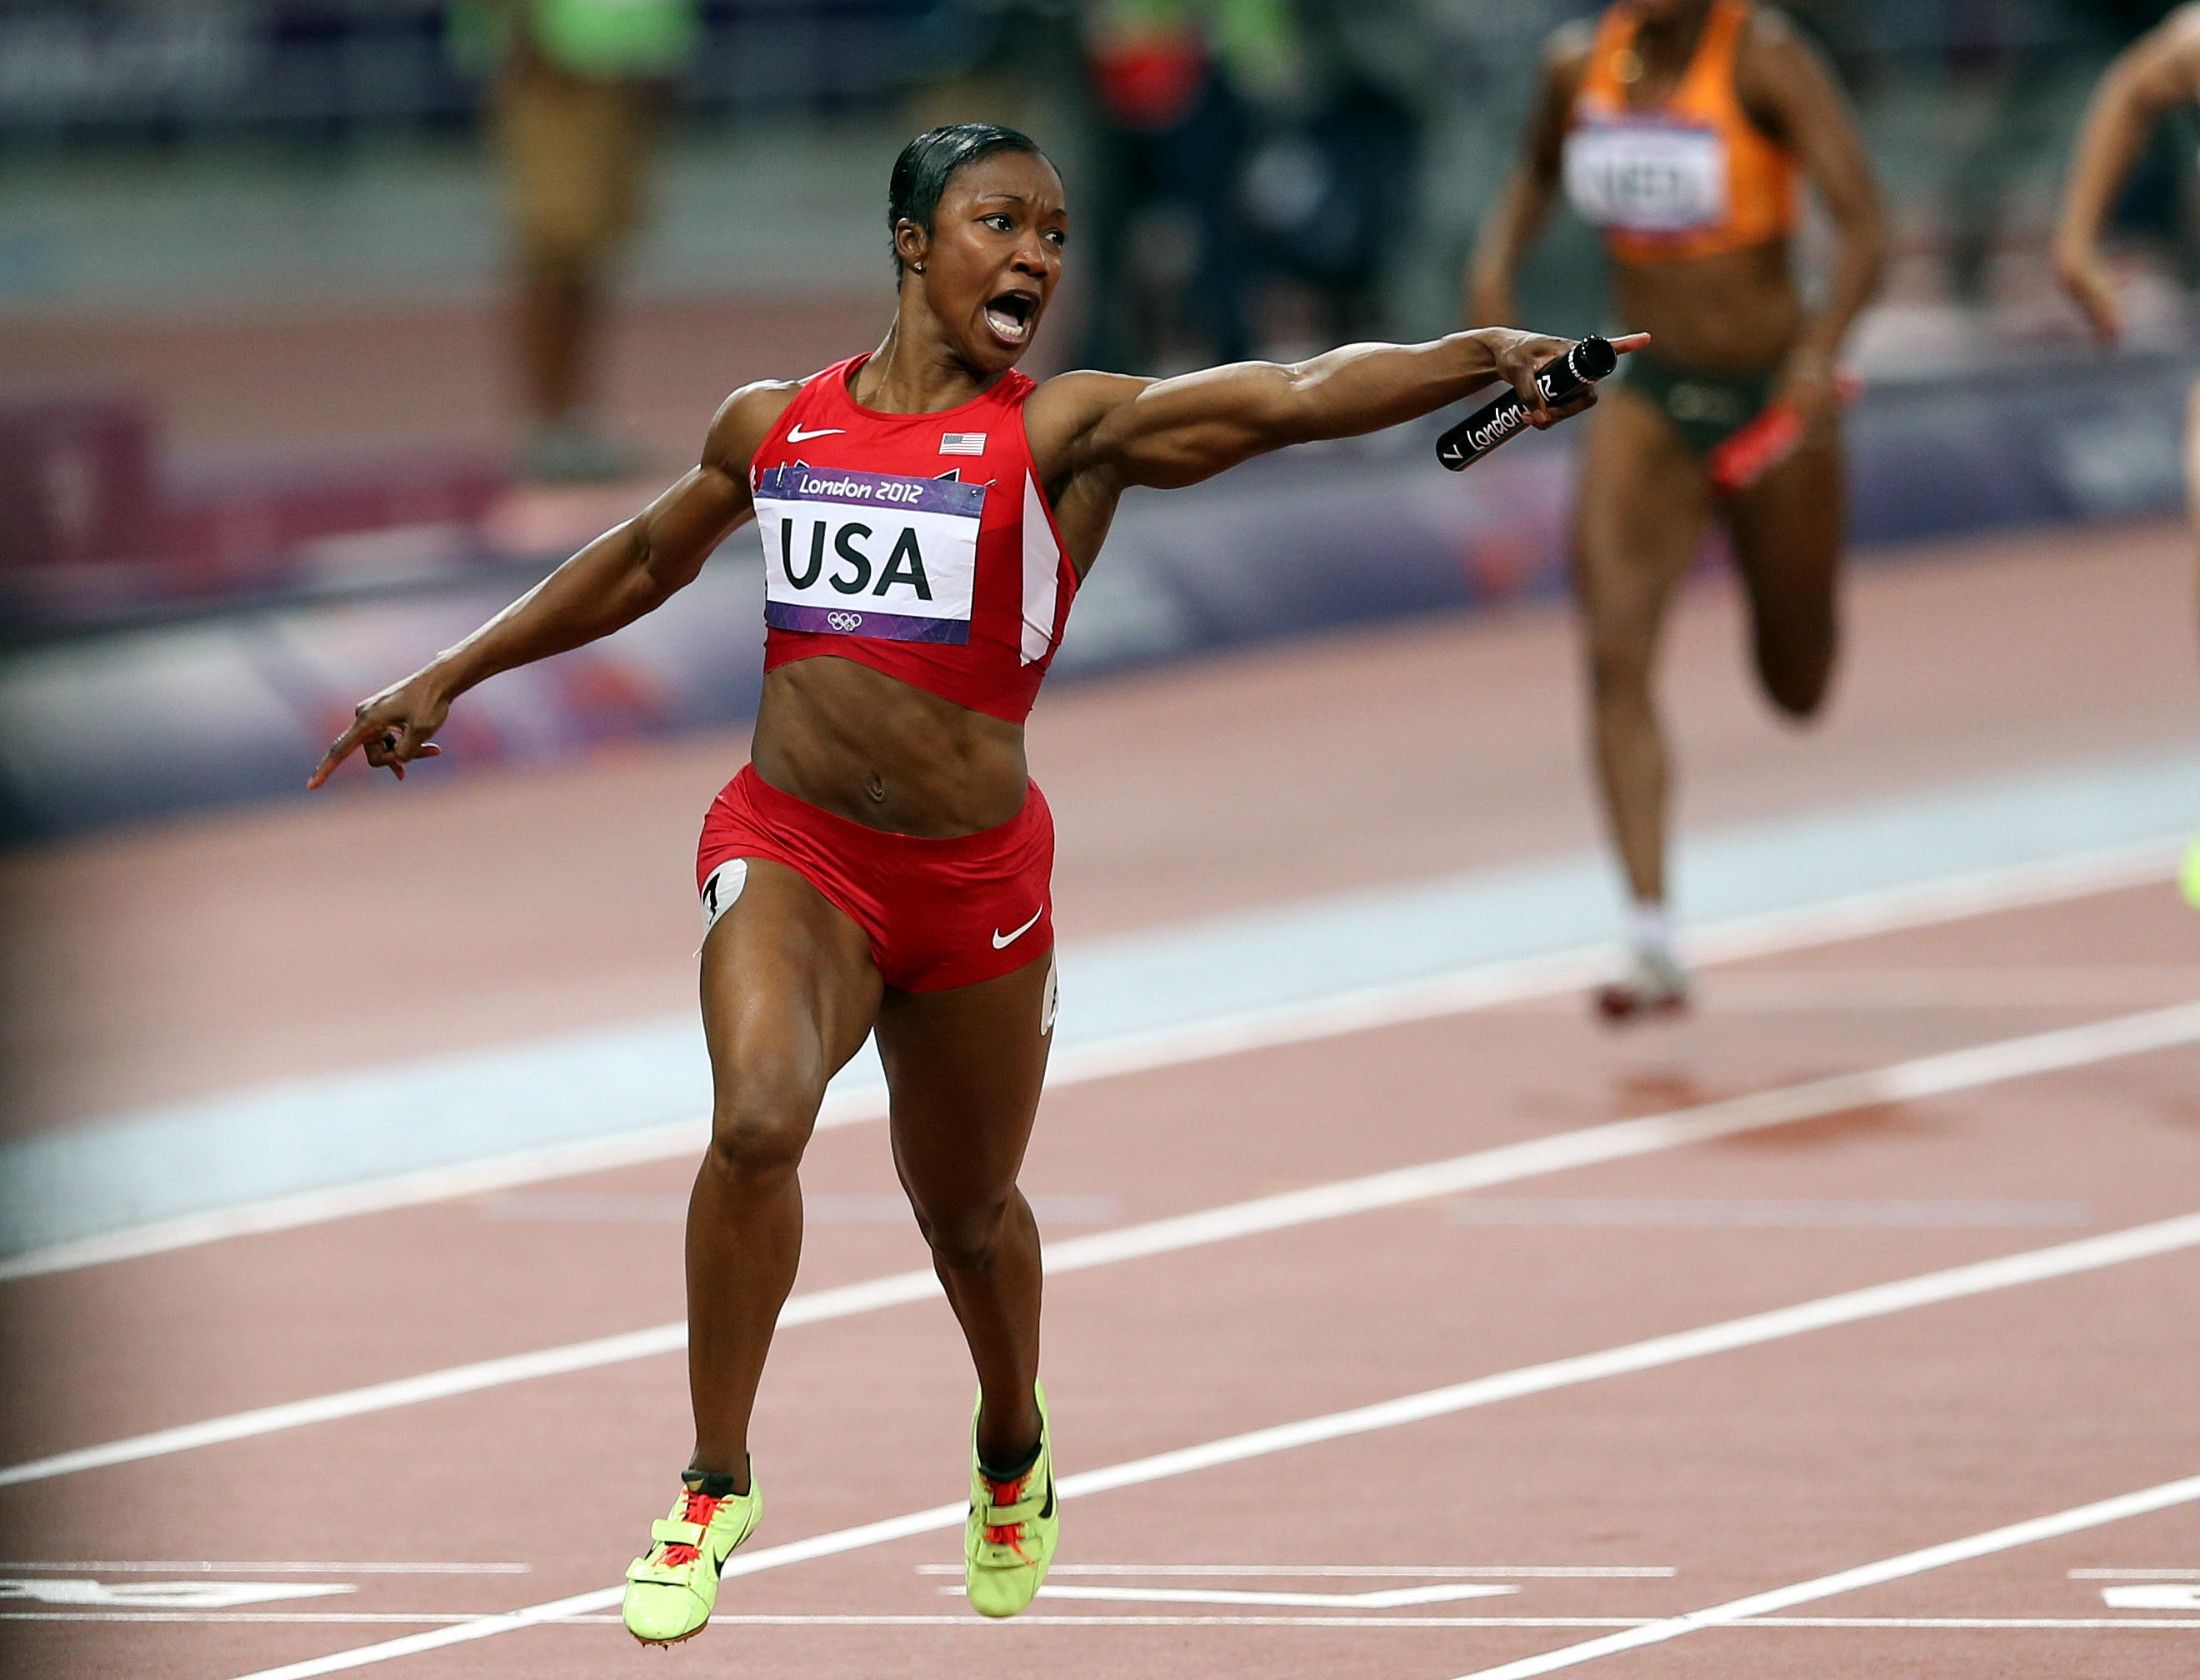 With reputed coaches, Indian sprinters can scale to top in future, says Carmelita Jeter